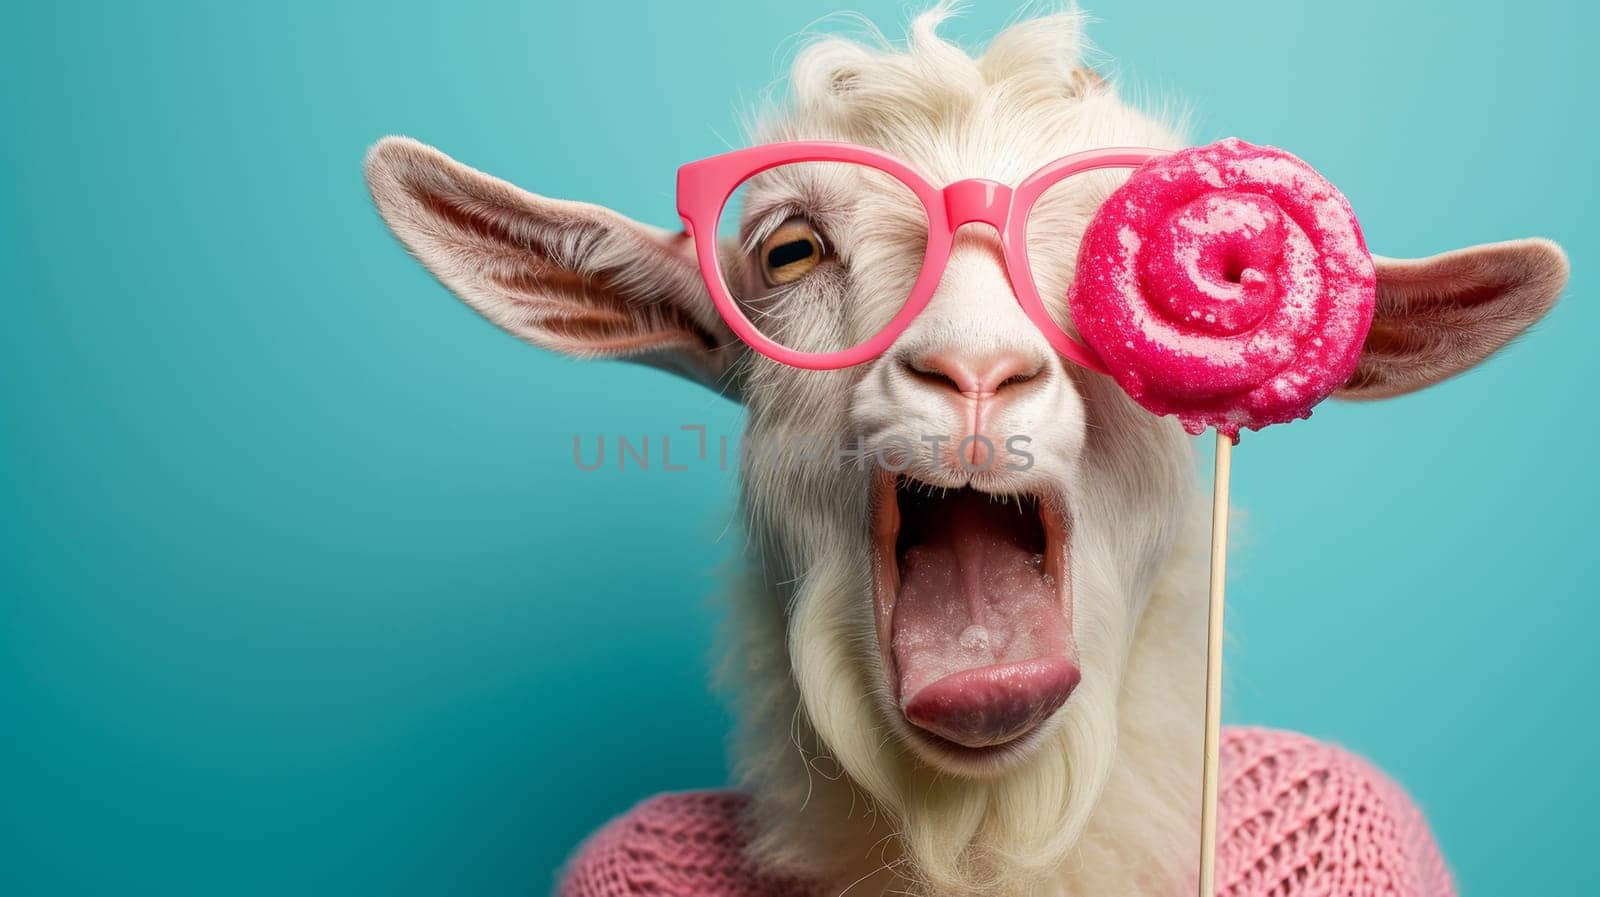 A goat with glasses and pink sweater holding a lollipop